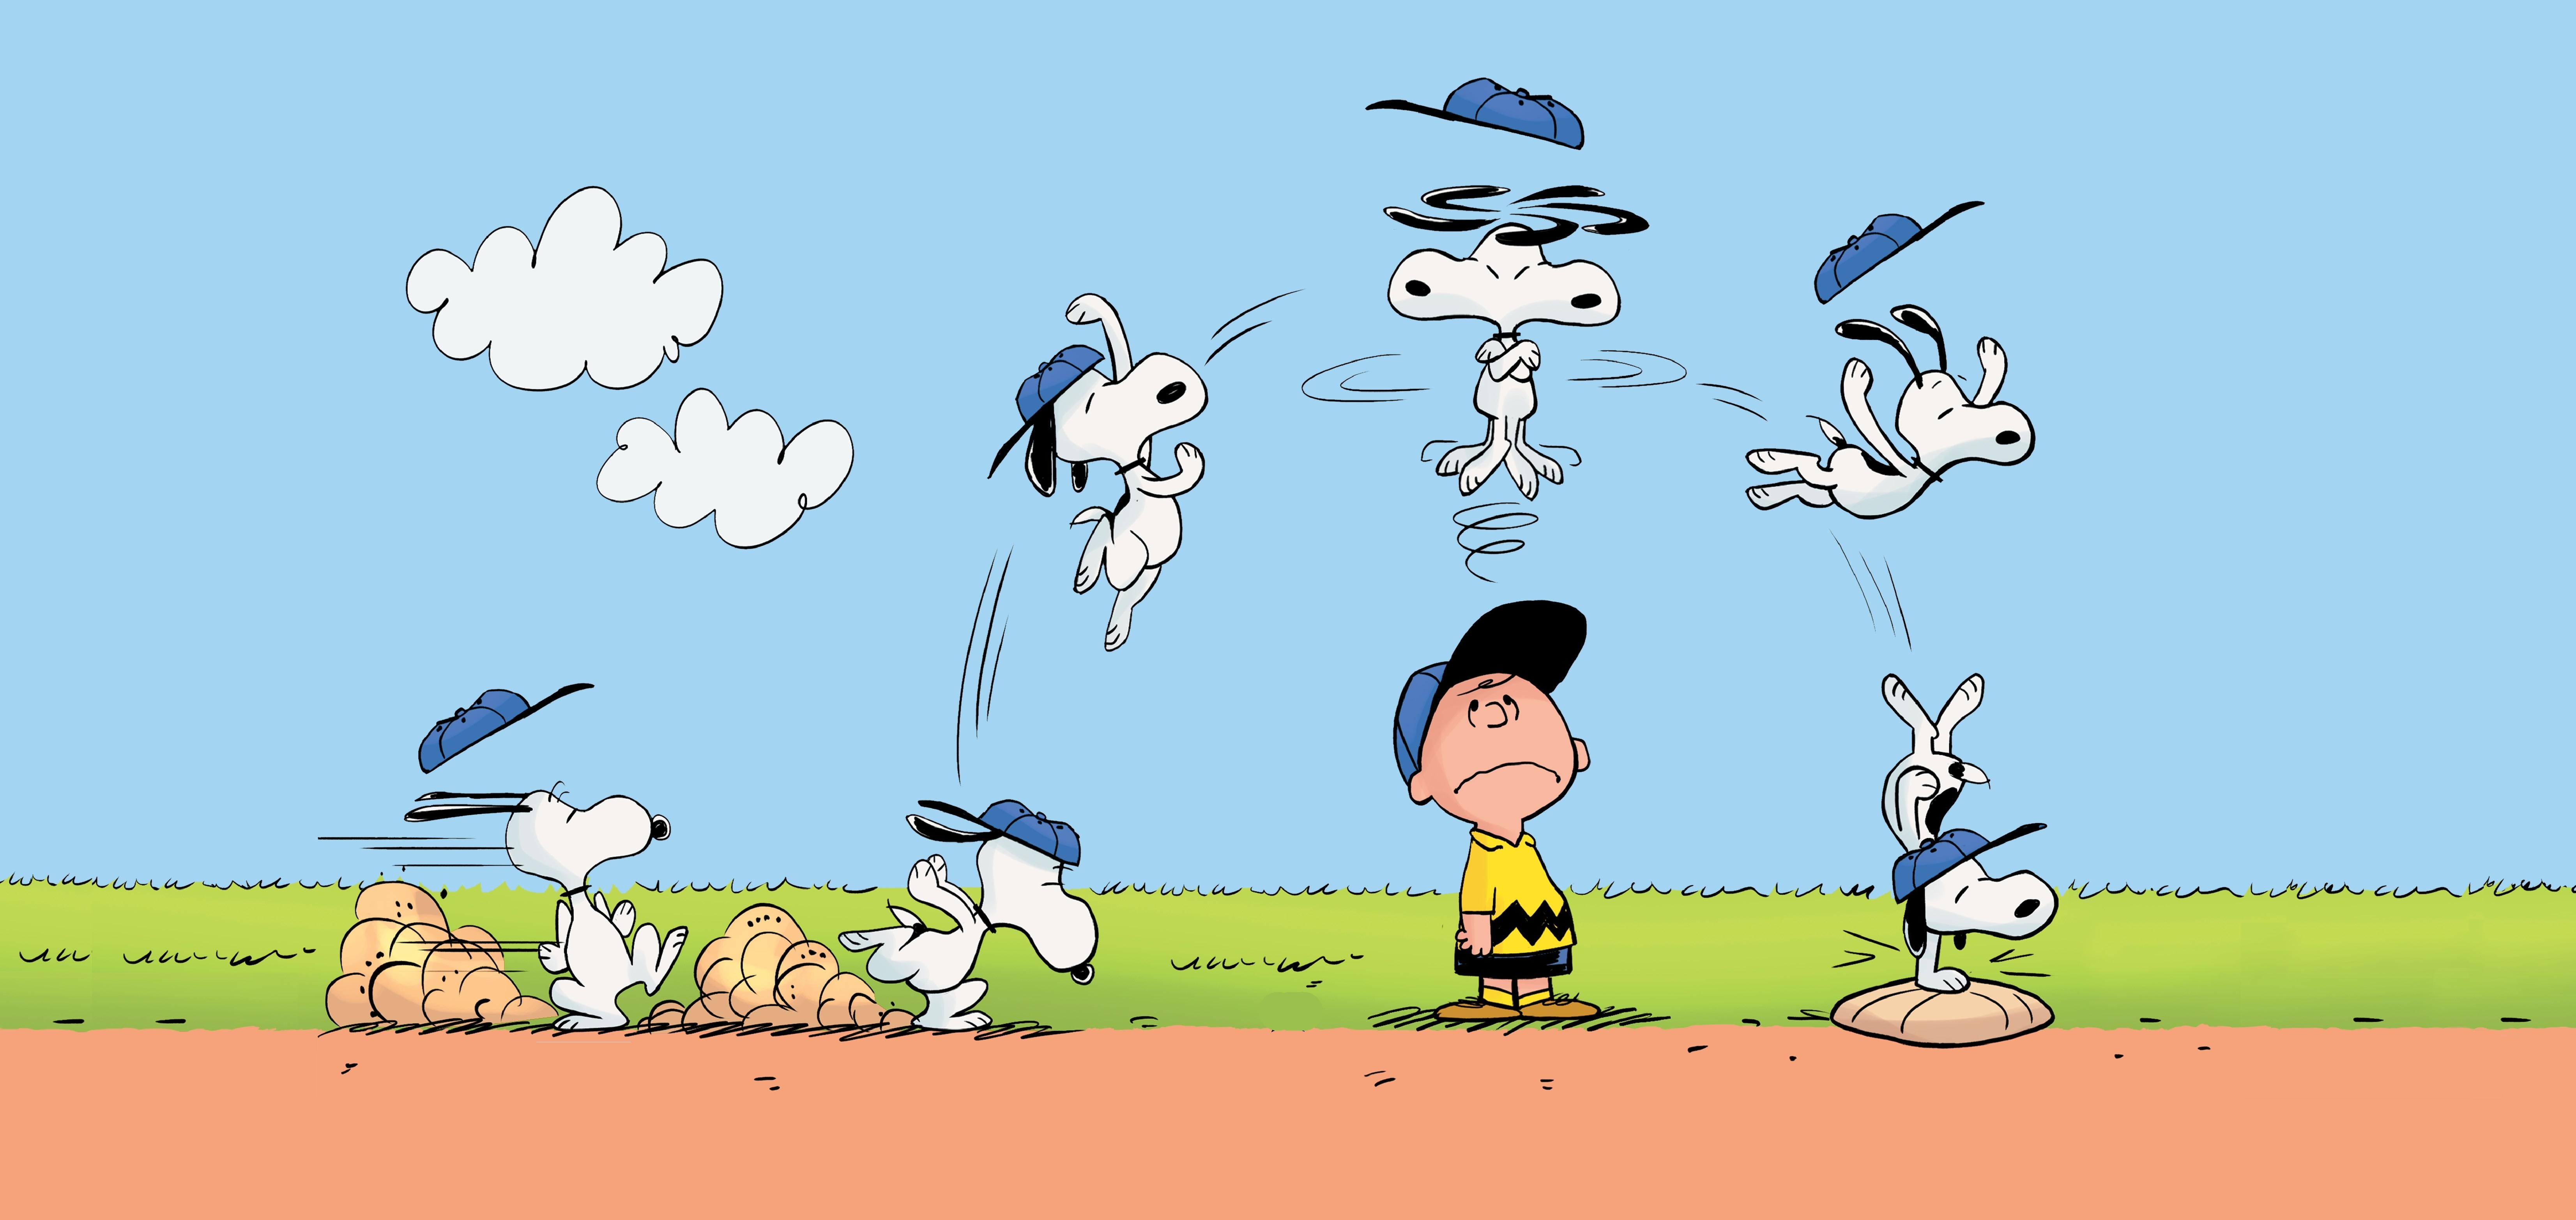 50 Free Snoopy Wallpaper For Computer On Wallpapersafari